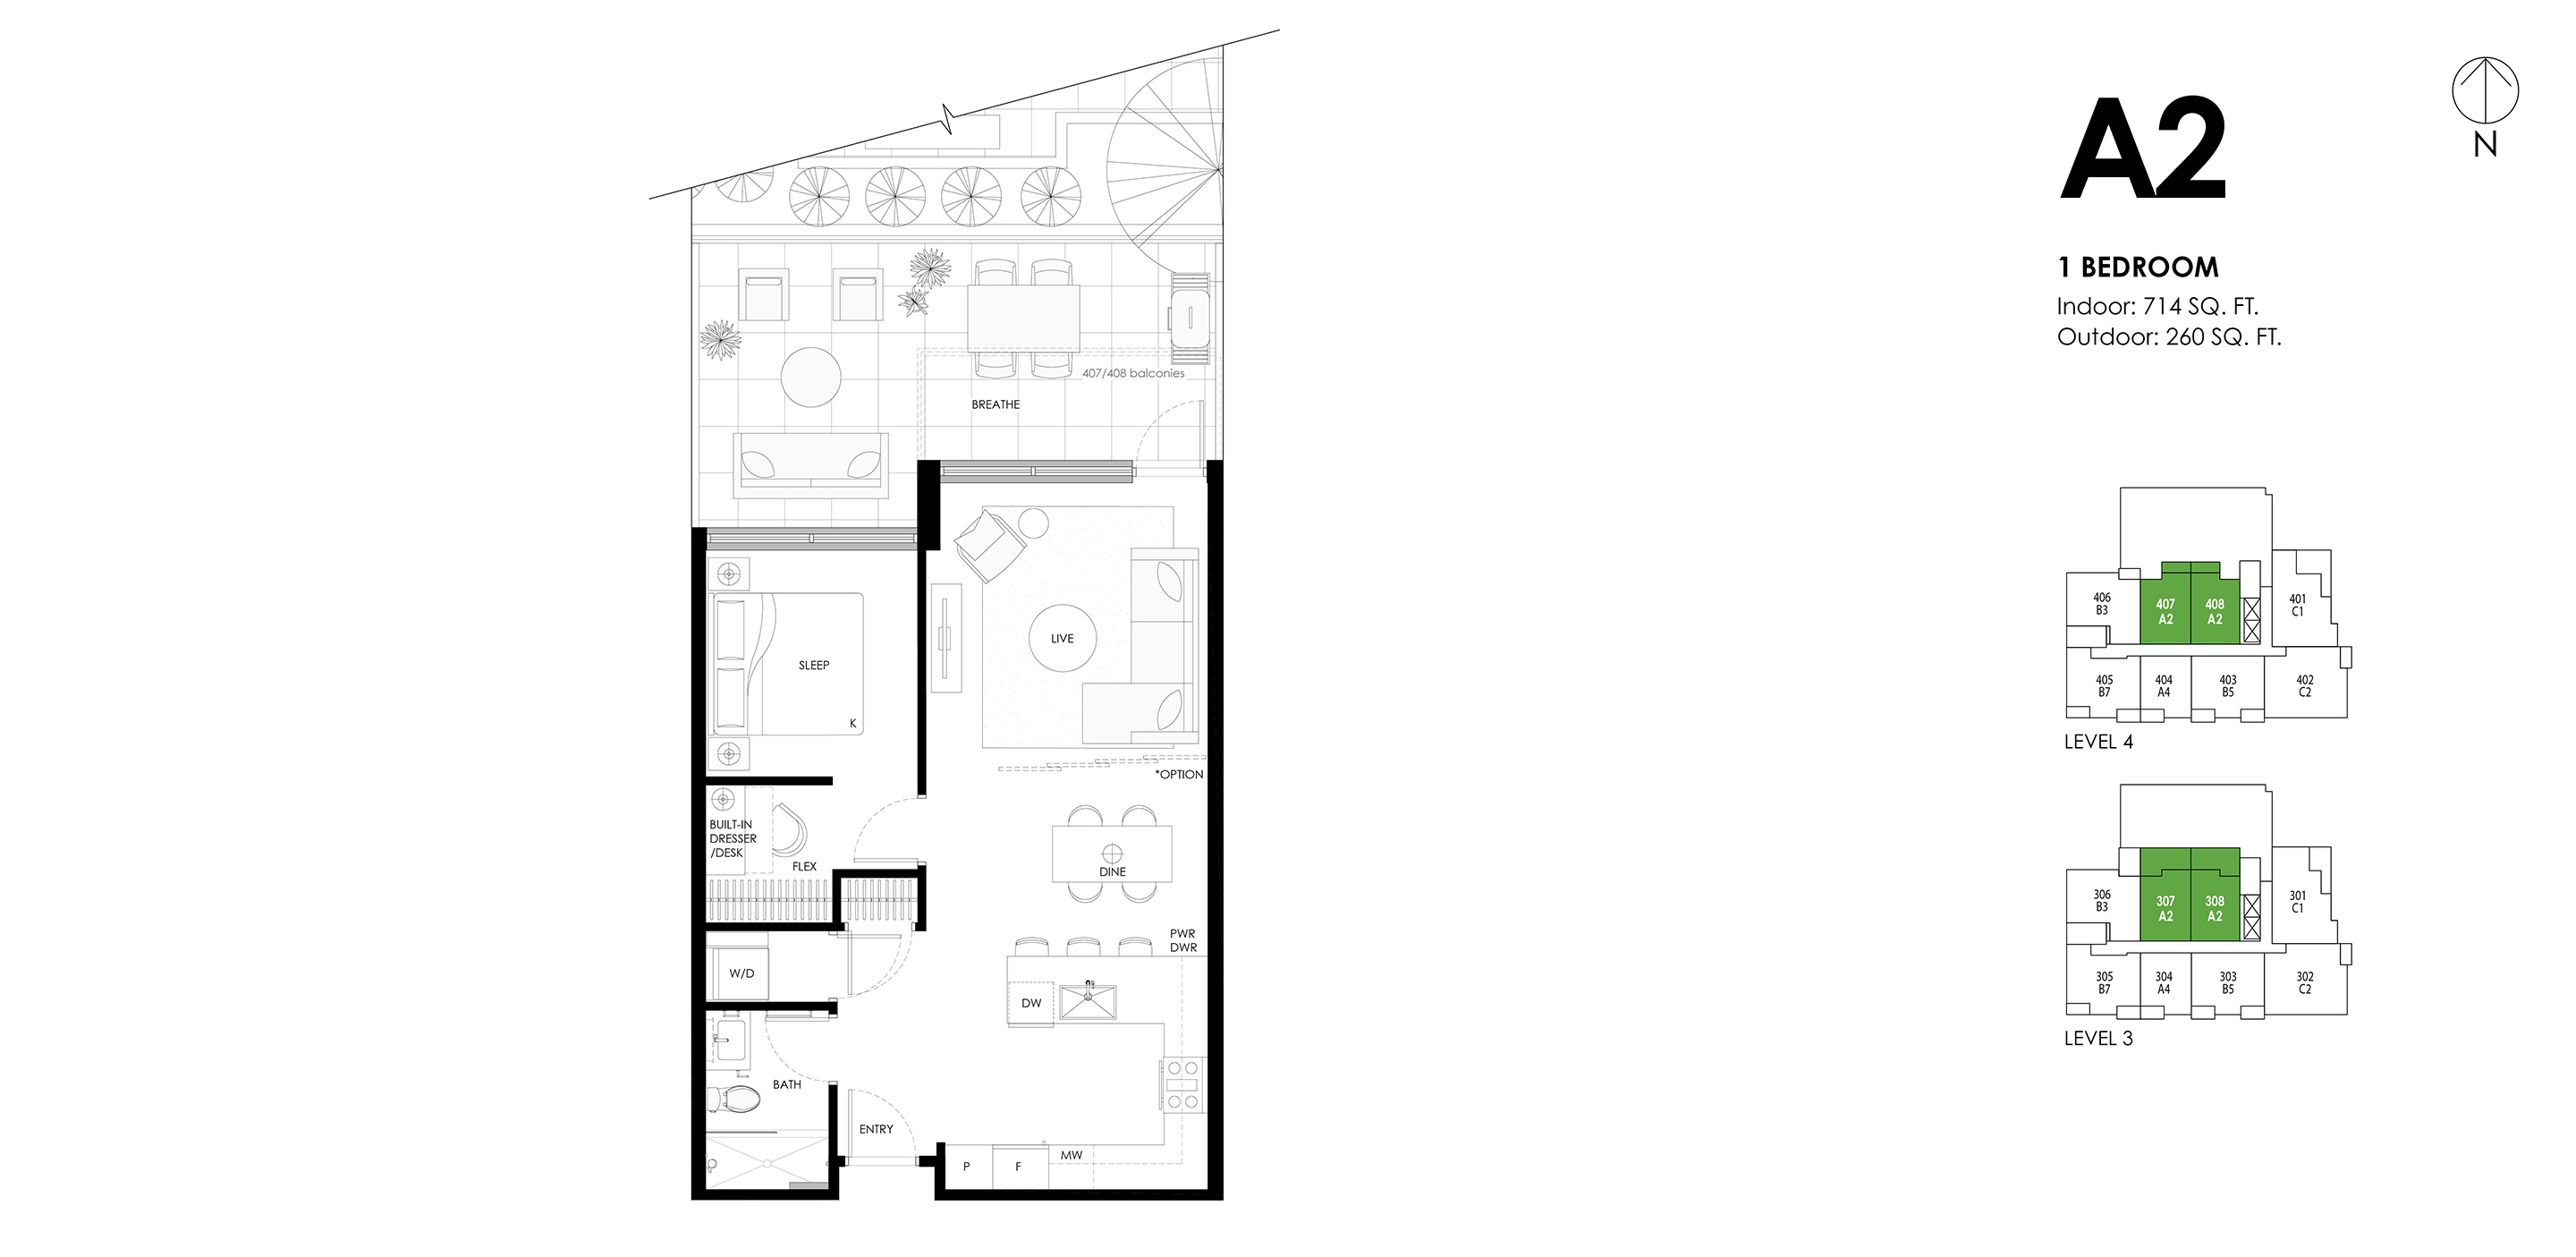 A2 Floor Plan of Ava Condos with undefined beds